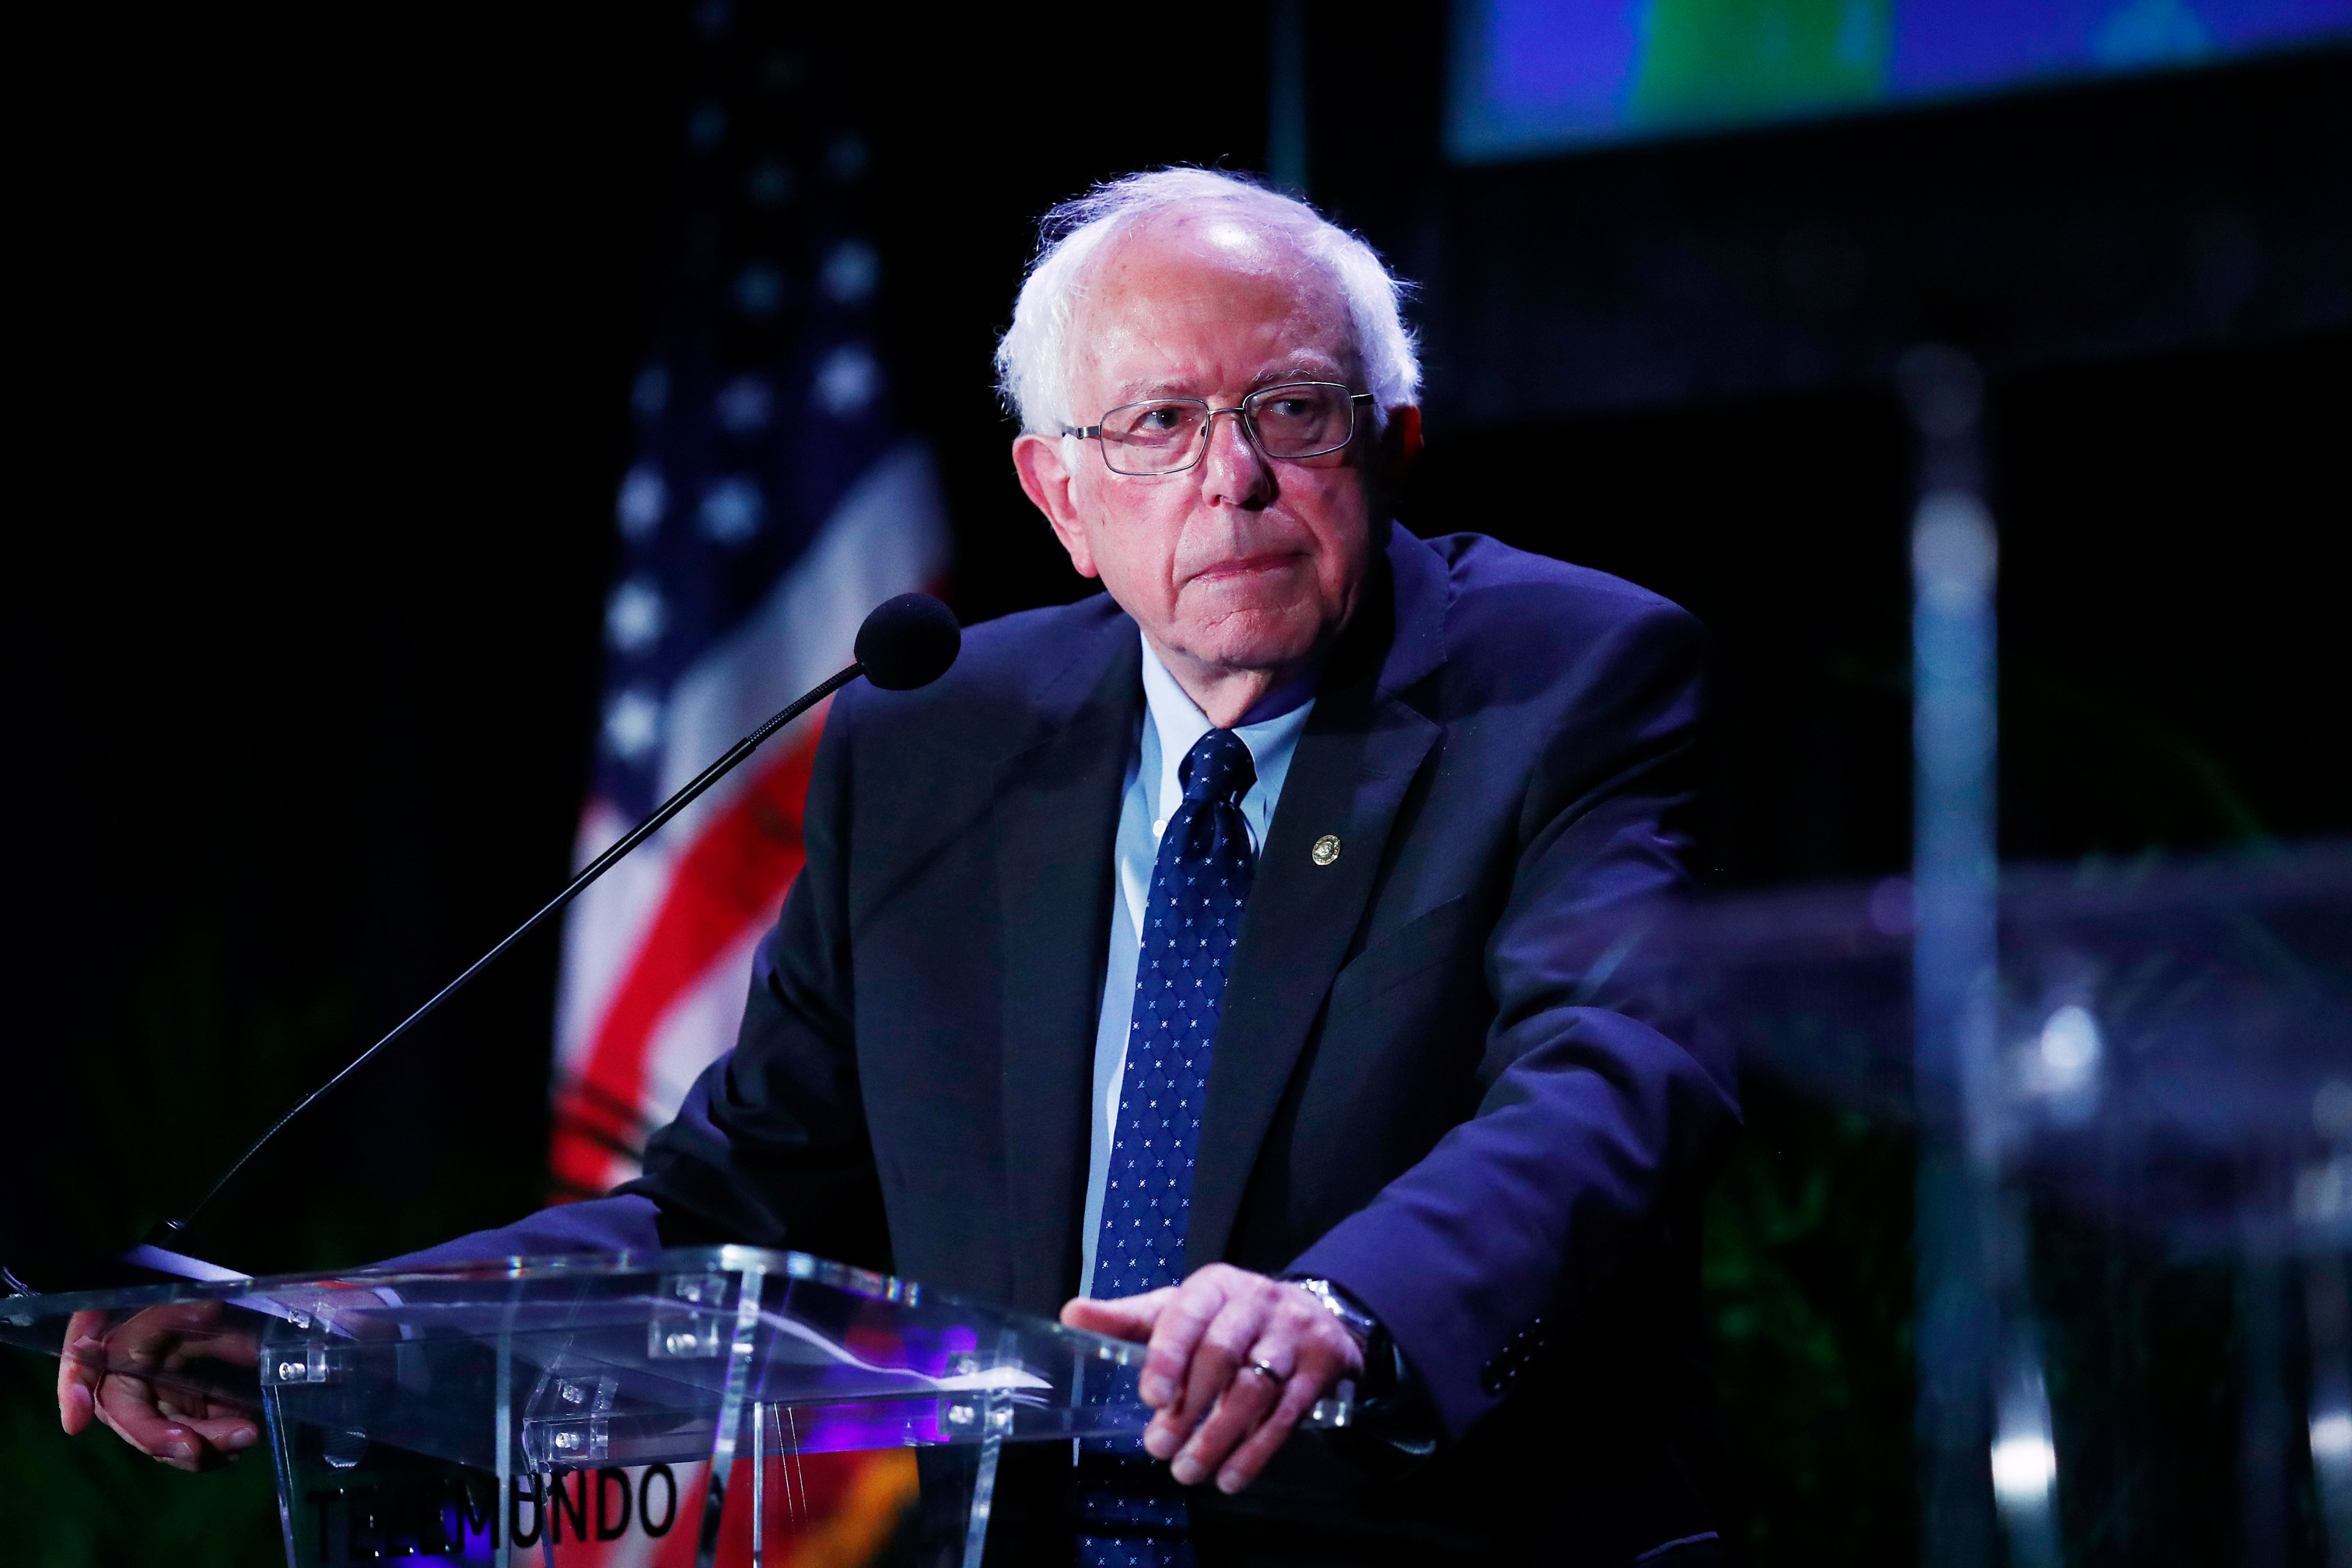 Democratic presidential candidate Sen. Bernie Sanders, I-Vt., pauses while speaking during a forum on Friday, June 21, 2019, in Miami. (Brynn Anderson—AP)